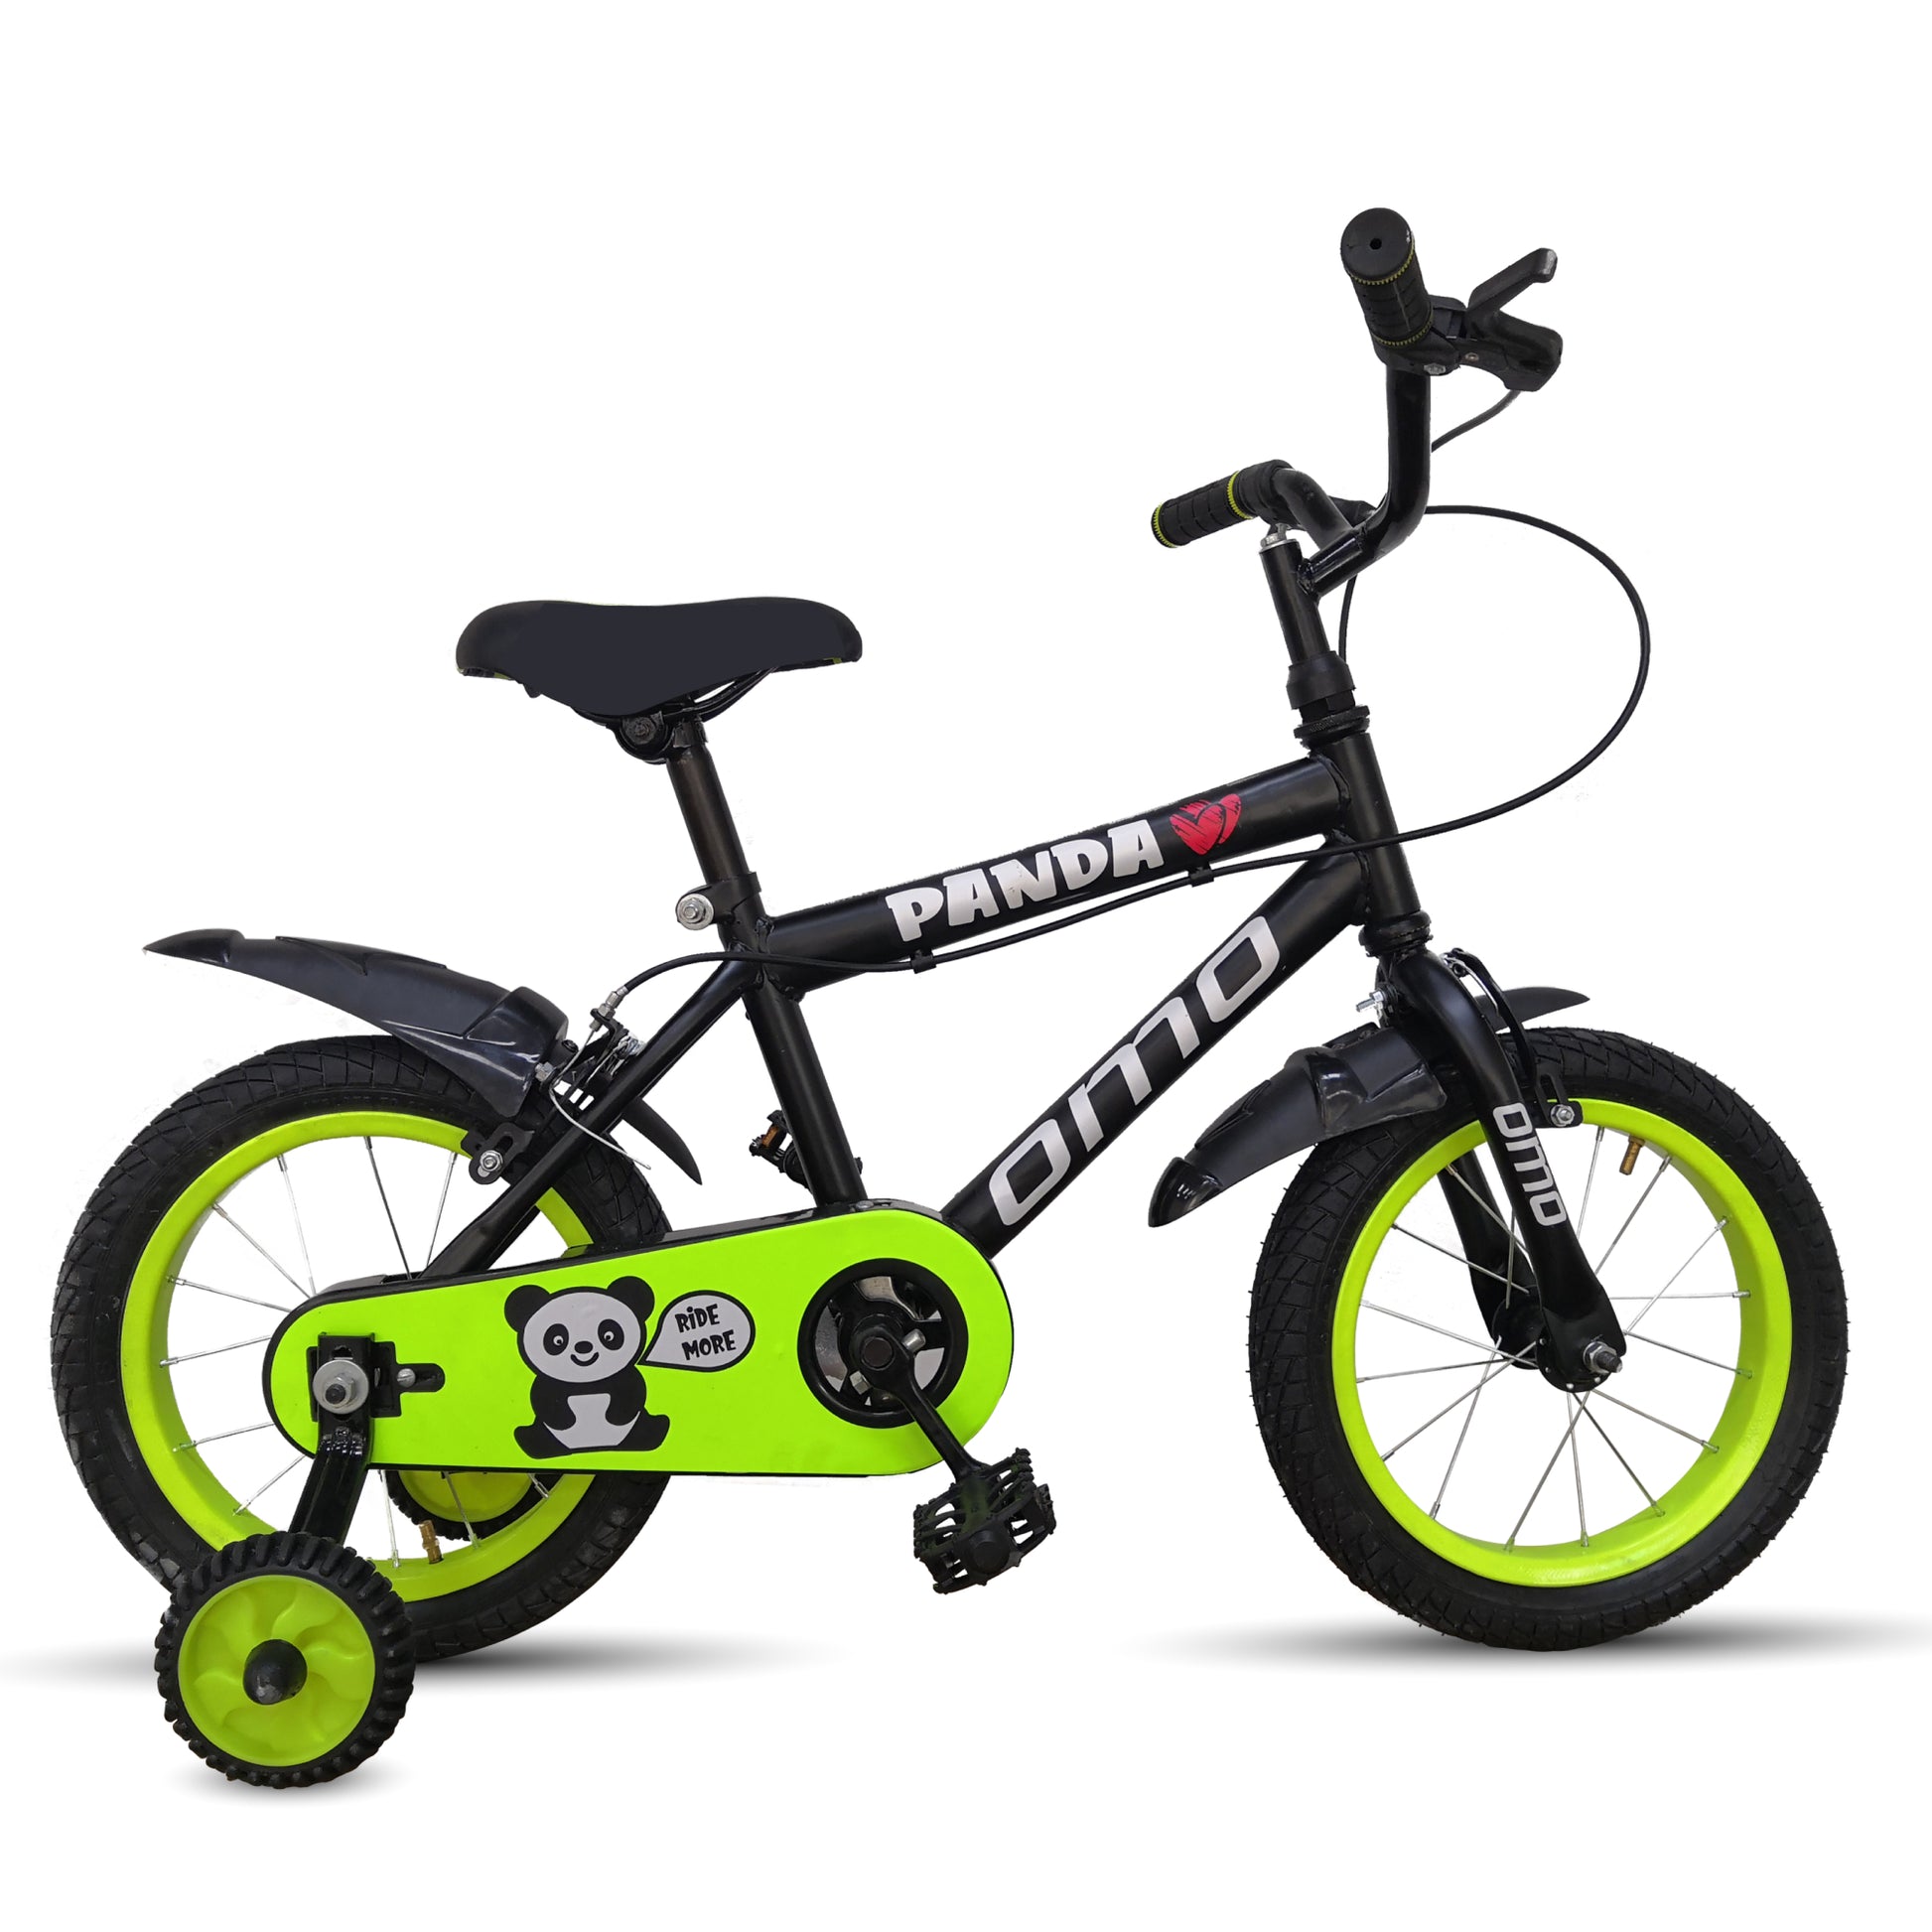 omobikes panda 14T kids cycle 3 to 5 year black color green rim